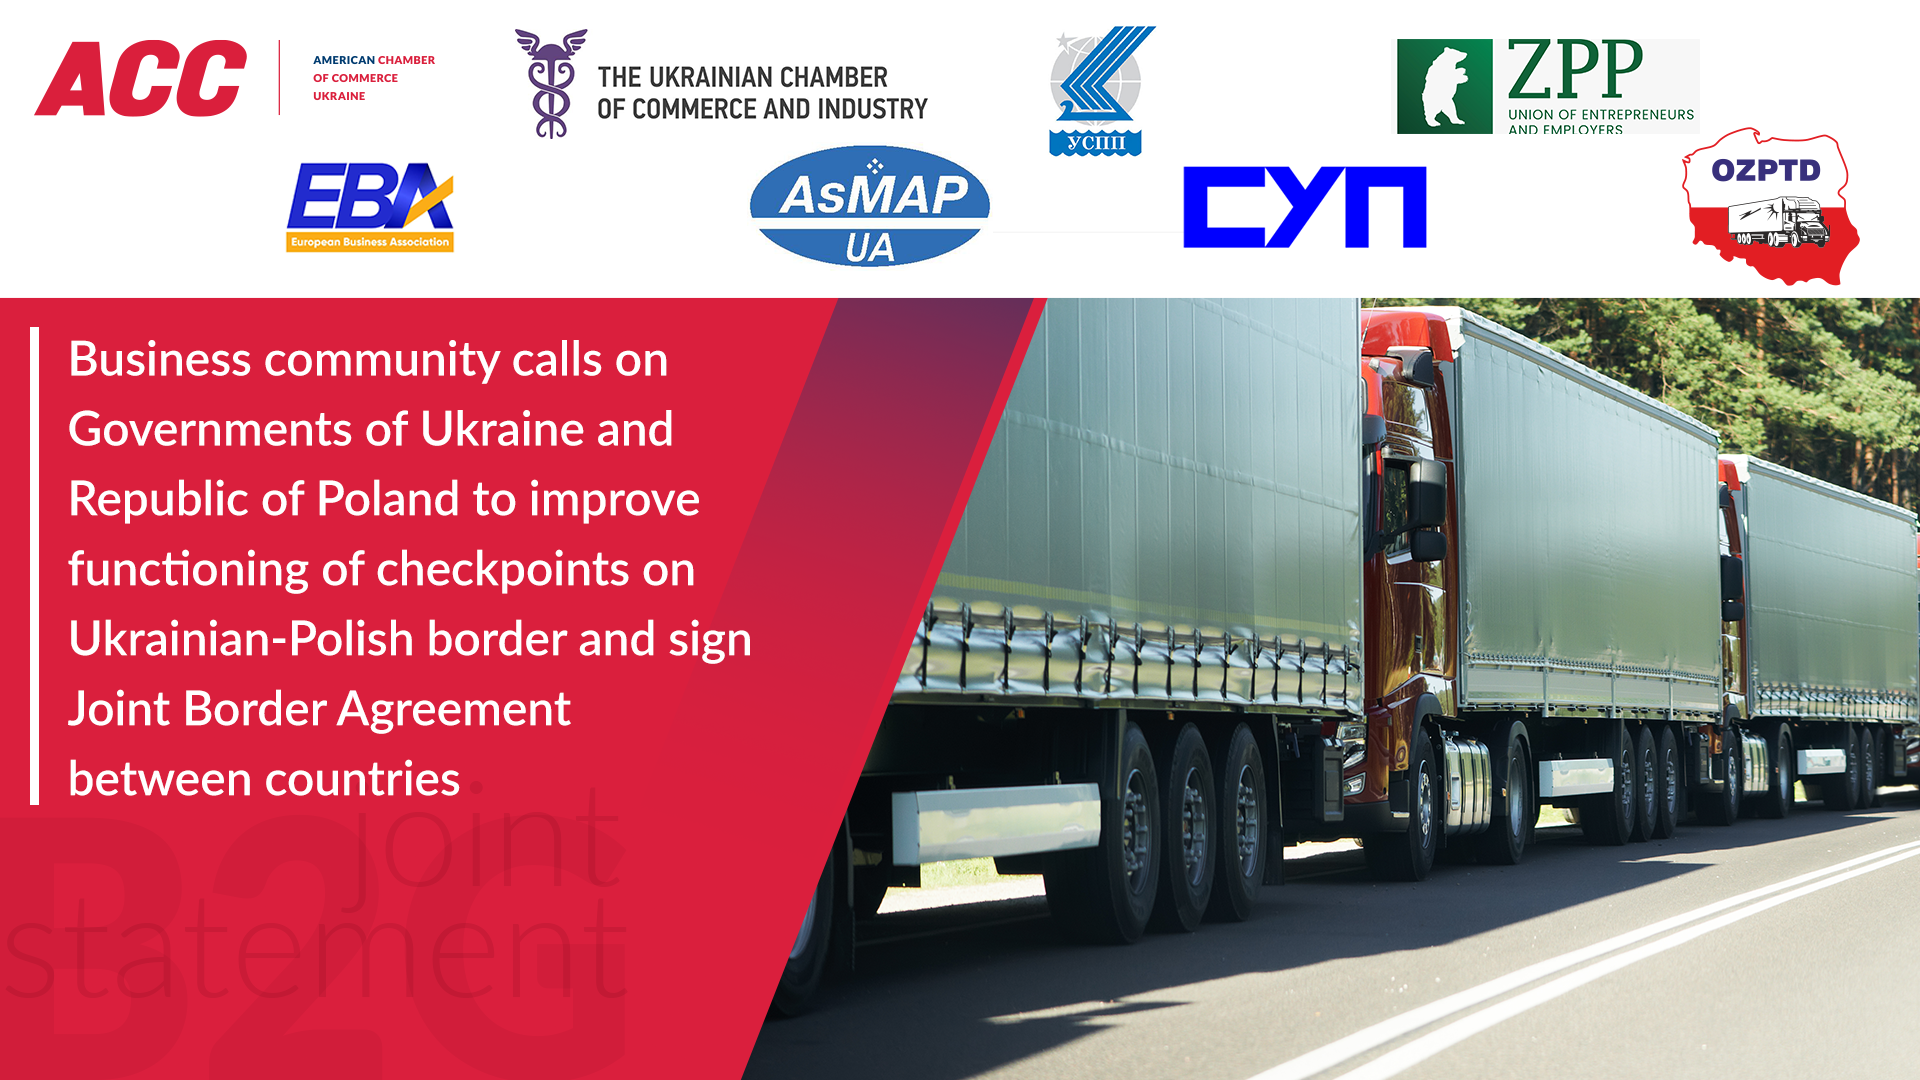 Business community calls on Governments of Ukraine and Republic of Poland to improve functioning of checkpoints on Ukrainian-Polish border and sign Joint Border Agreement between countries